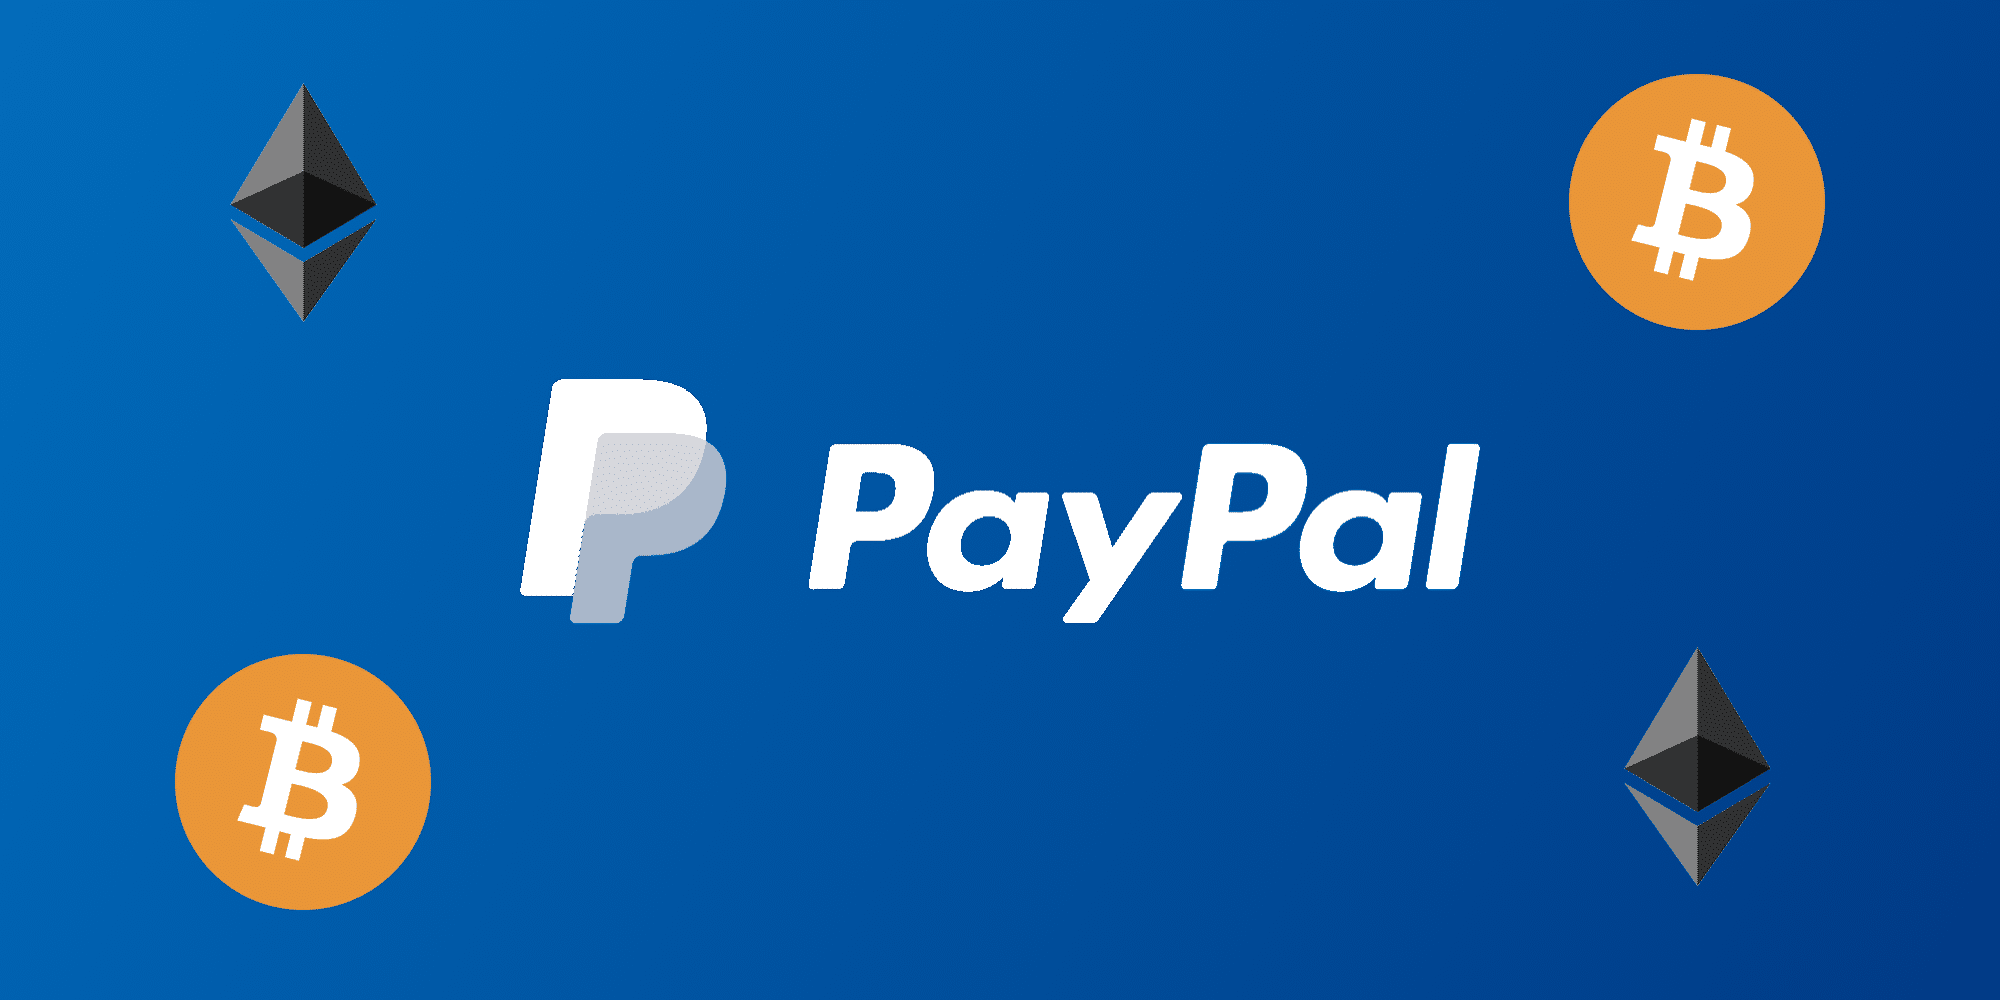 Is paypal a cryptocurrency btc anatomy